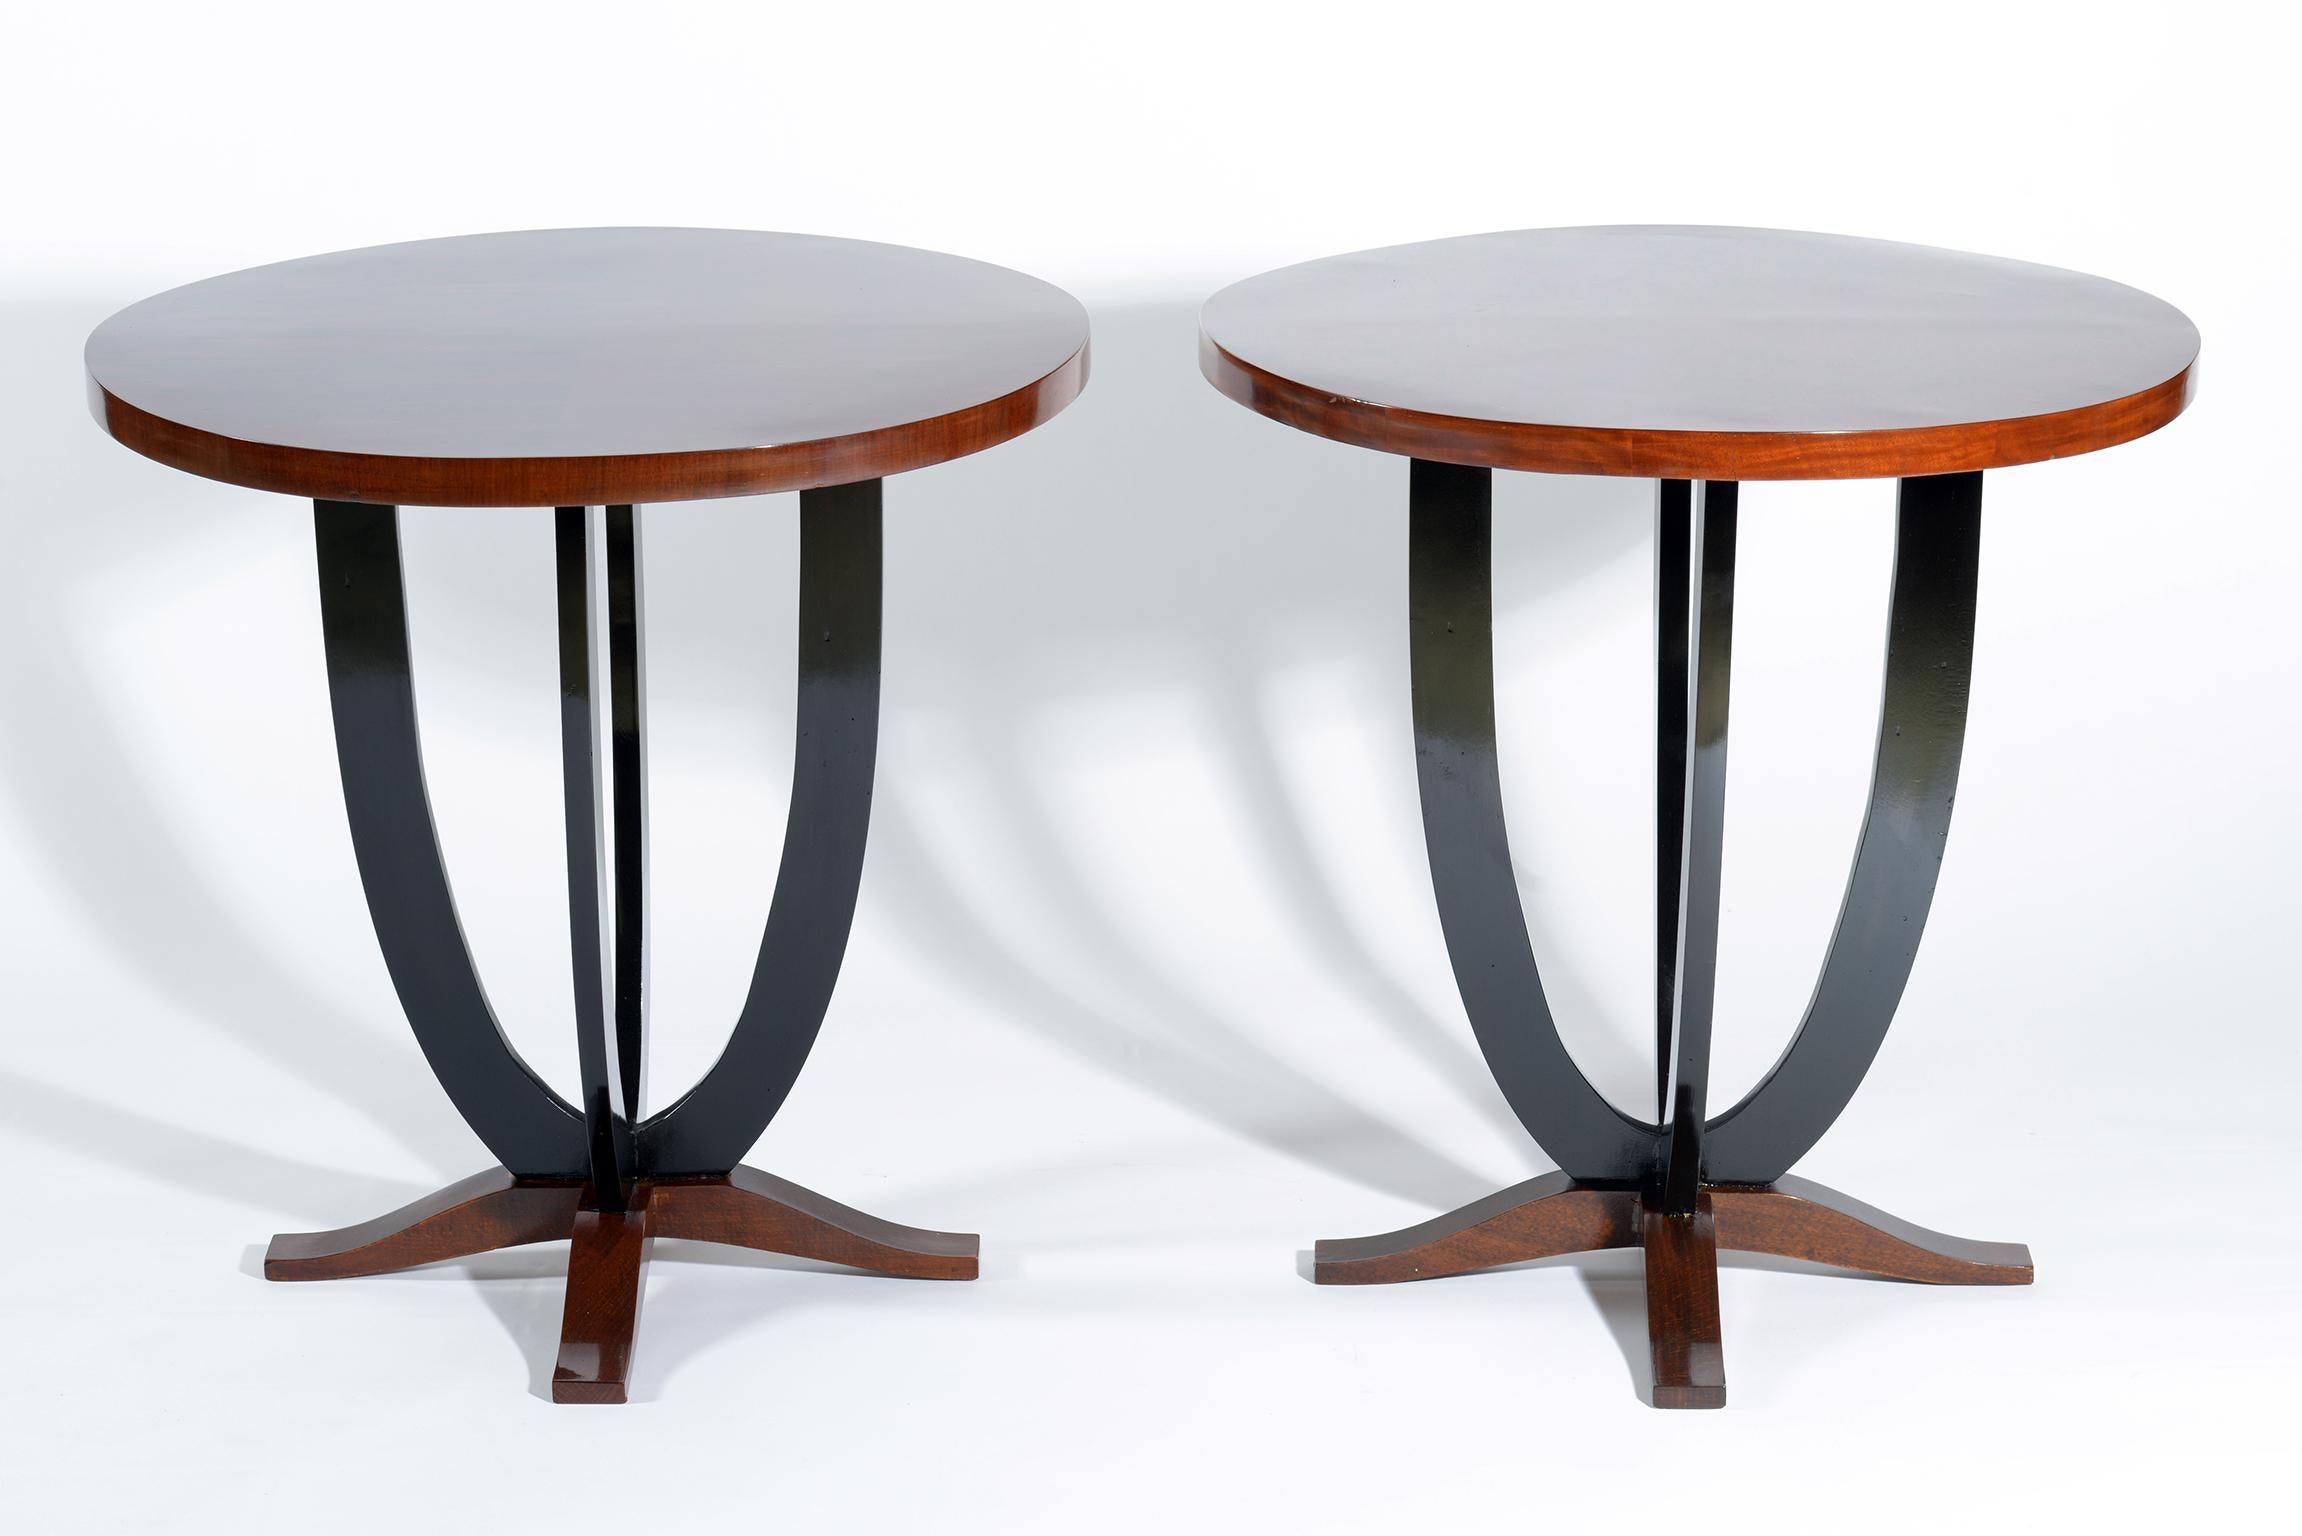 Pair of Art Deco round precious exotic wood and black laquered legs side tables.
Italia Mid-Century Modern.